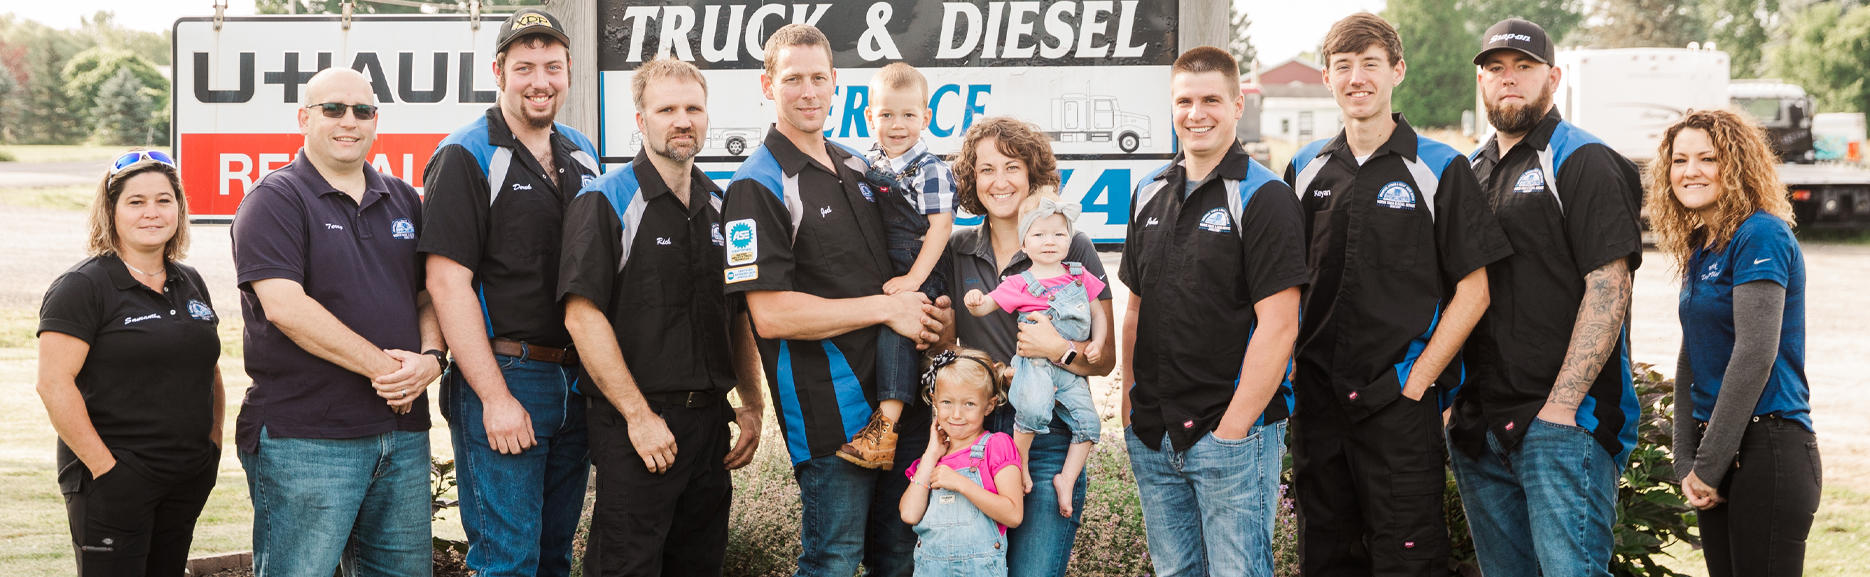 We opened Widrick Truck & Diesel Service in 2007. In 2009 we brought a vacant lot and built a new building in Carthage New York. We moved into the new facility in January 2010. I fell in love with Diesel Engines when I was growing up on my family's farm. I decided to pursue a career in Diesel Engine Repair. if you are looking for Diesel Engine Diagnostics, Brake Repair, or Transmission Repair bring your truck in for us to give you a Diagnostic Inspection. We have also branched out into European and Hybrid Automotive Repair.